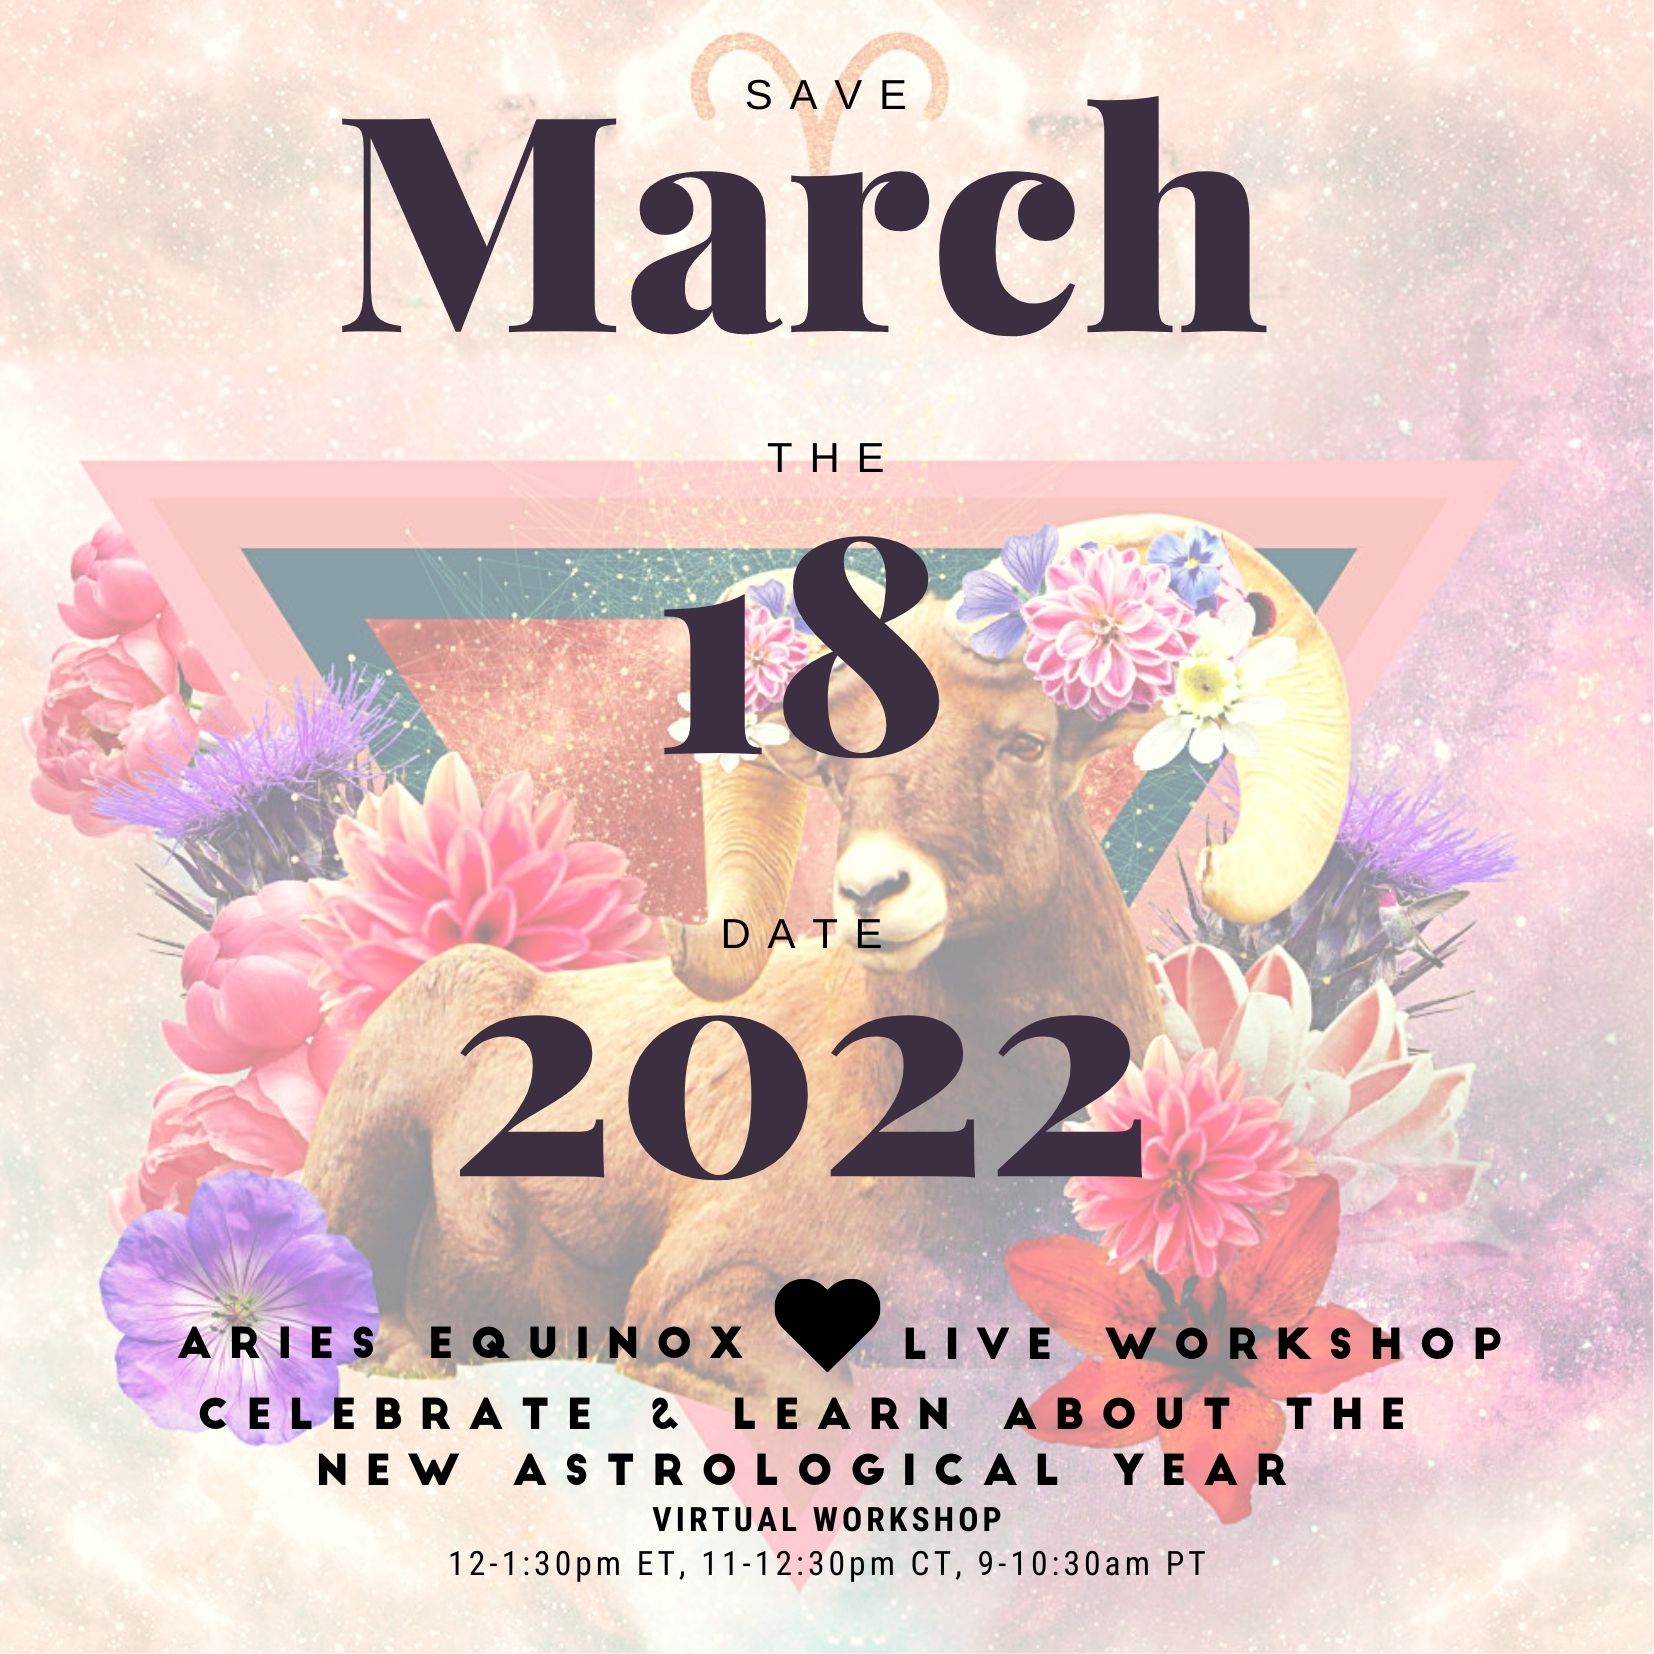 Aries Equinox Live Virtual Event: Join Me and Learn About the New Astrological Year